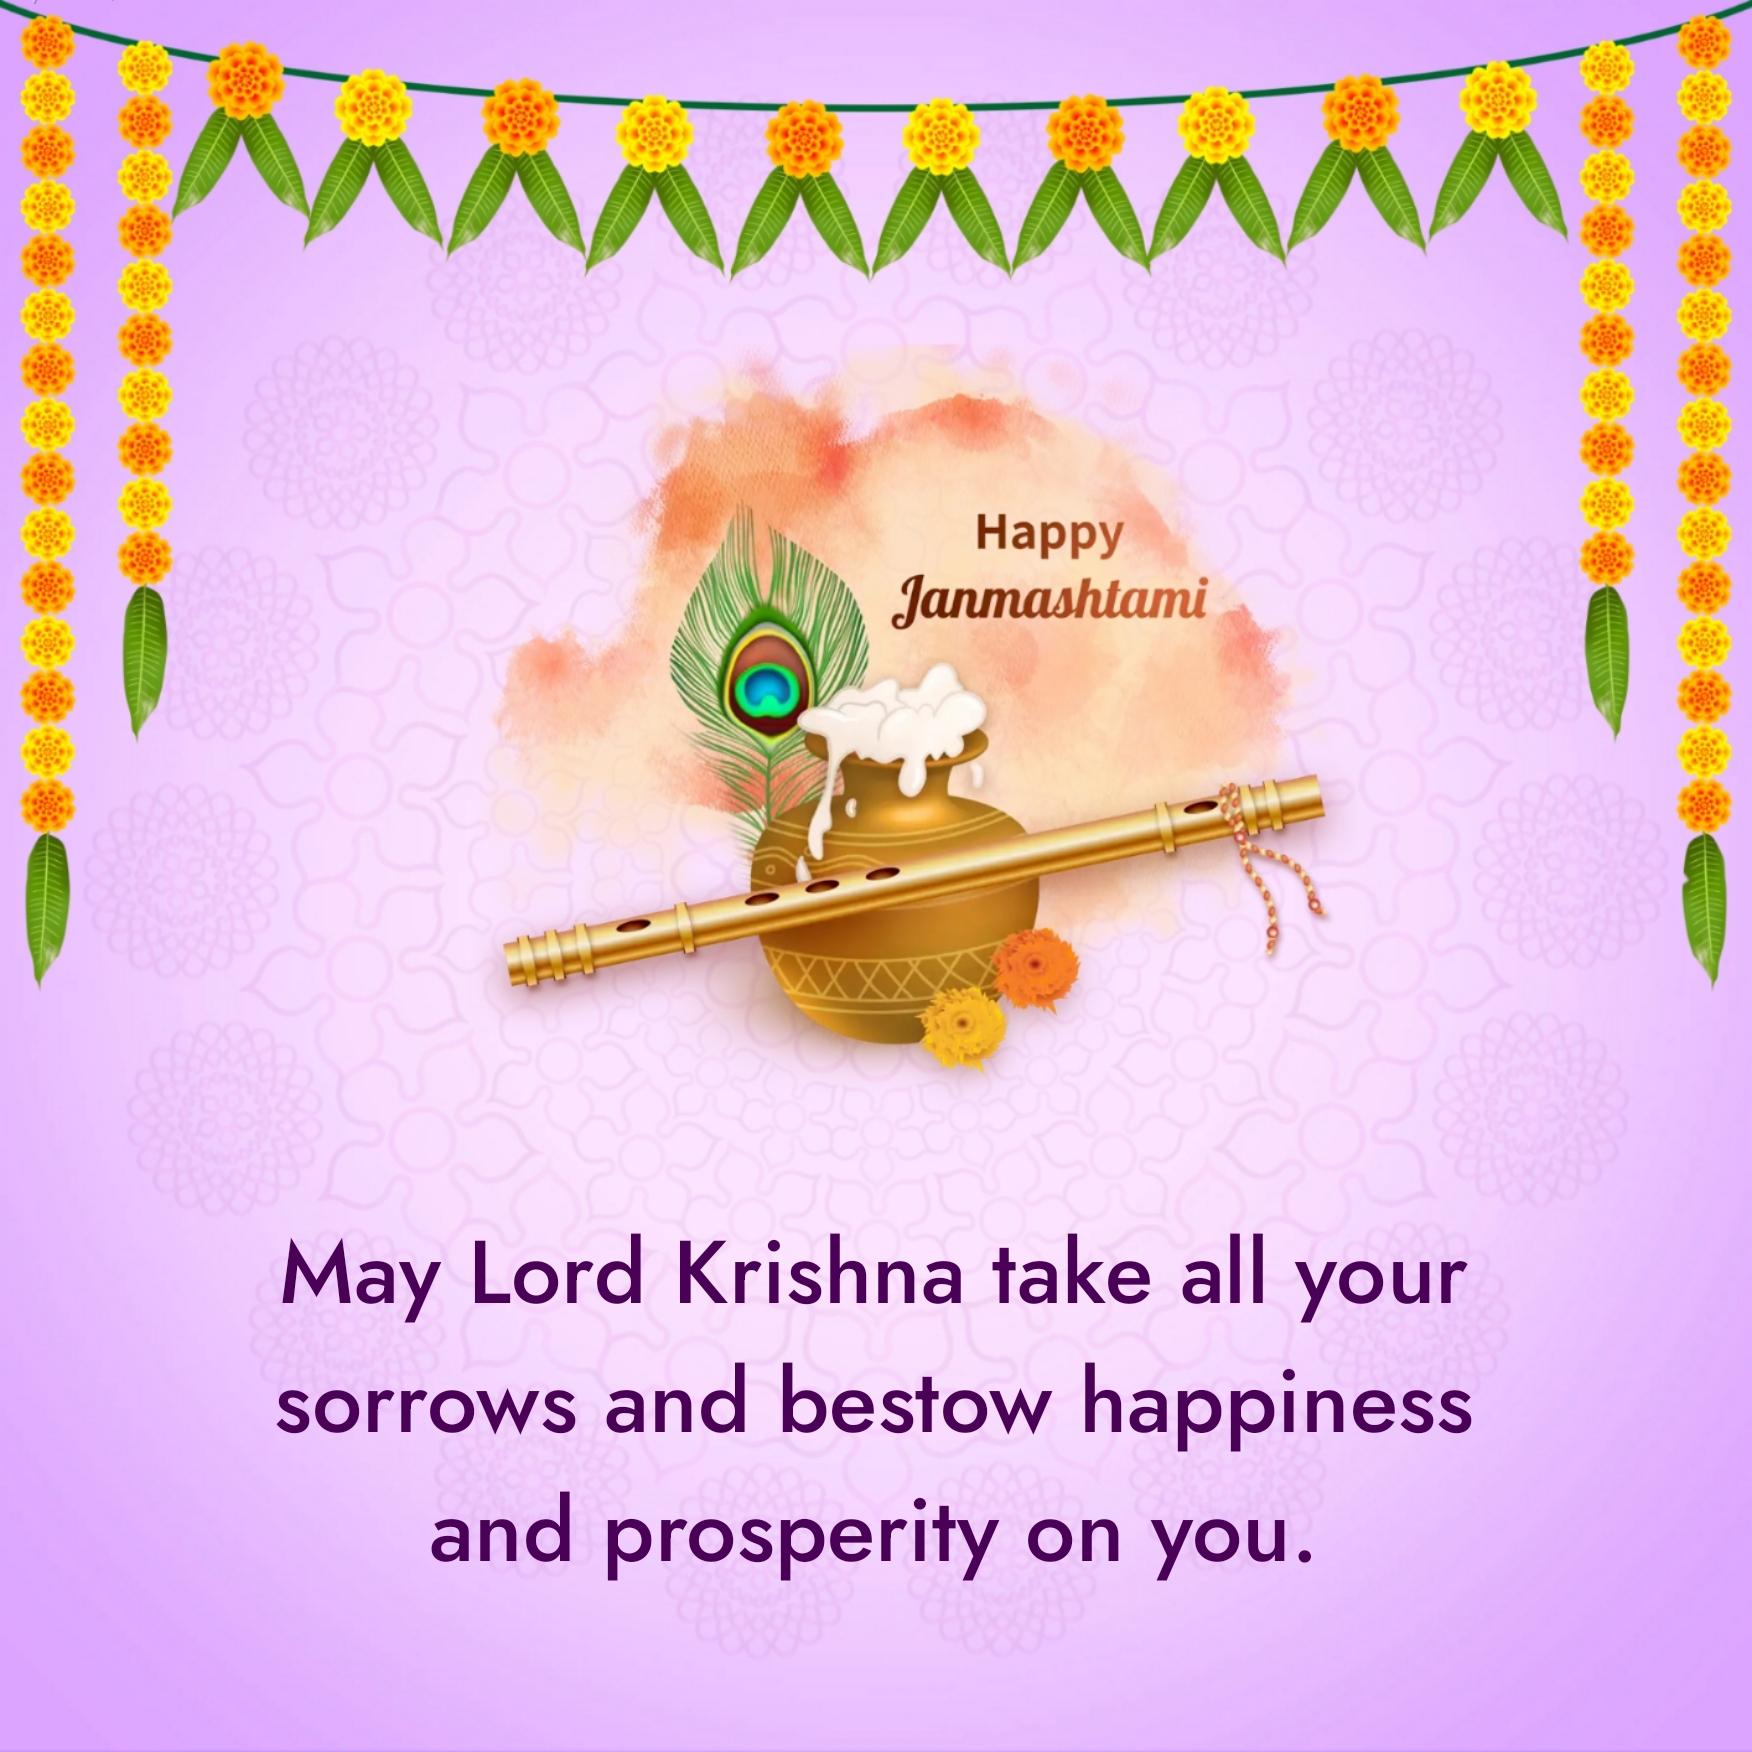 May Lord Krishna take all your sorrows and bestow happiness